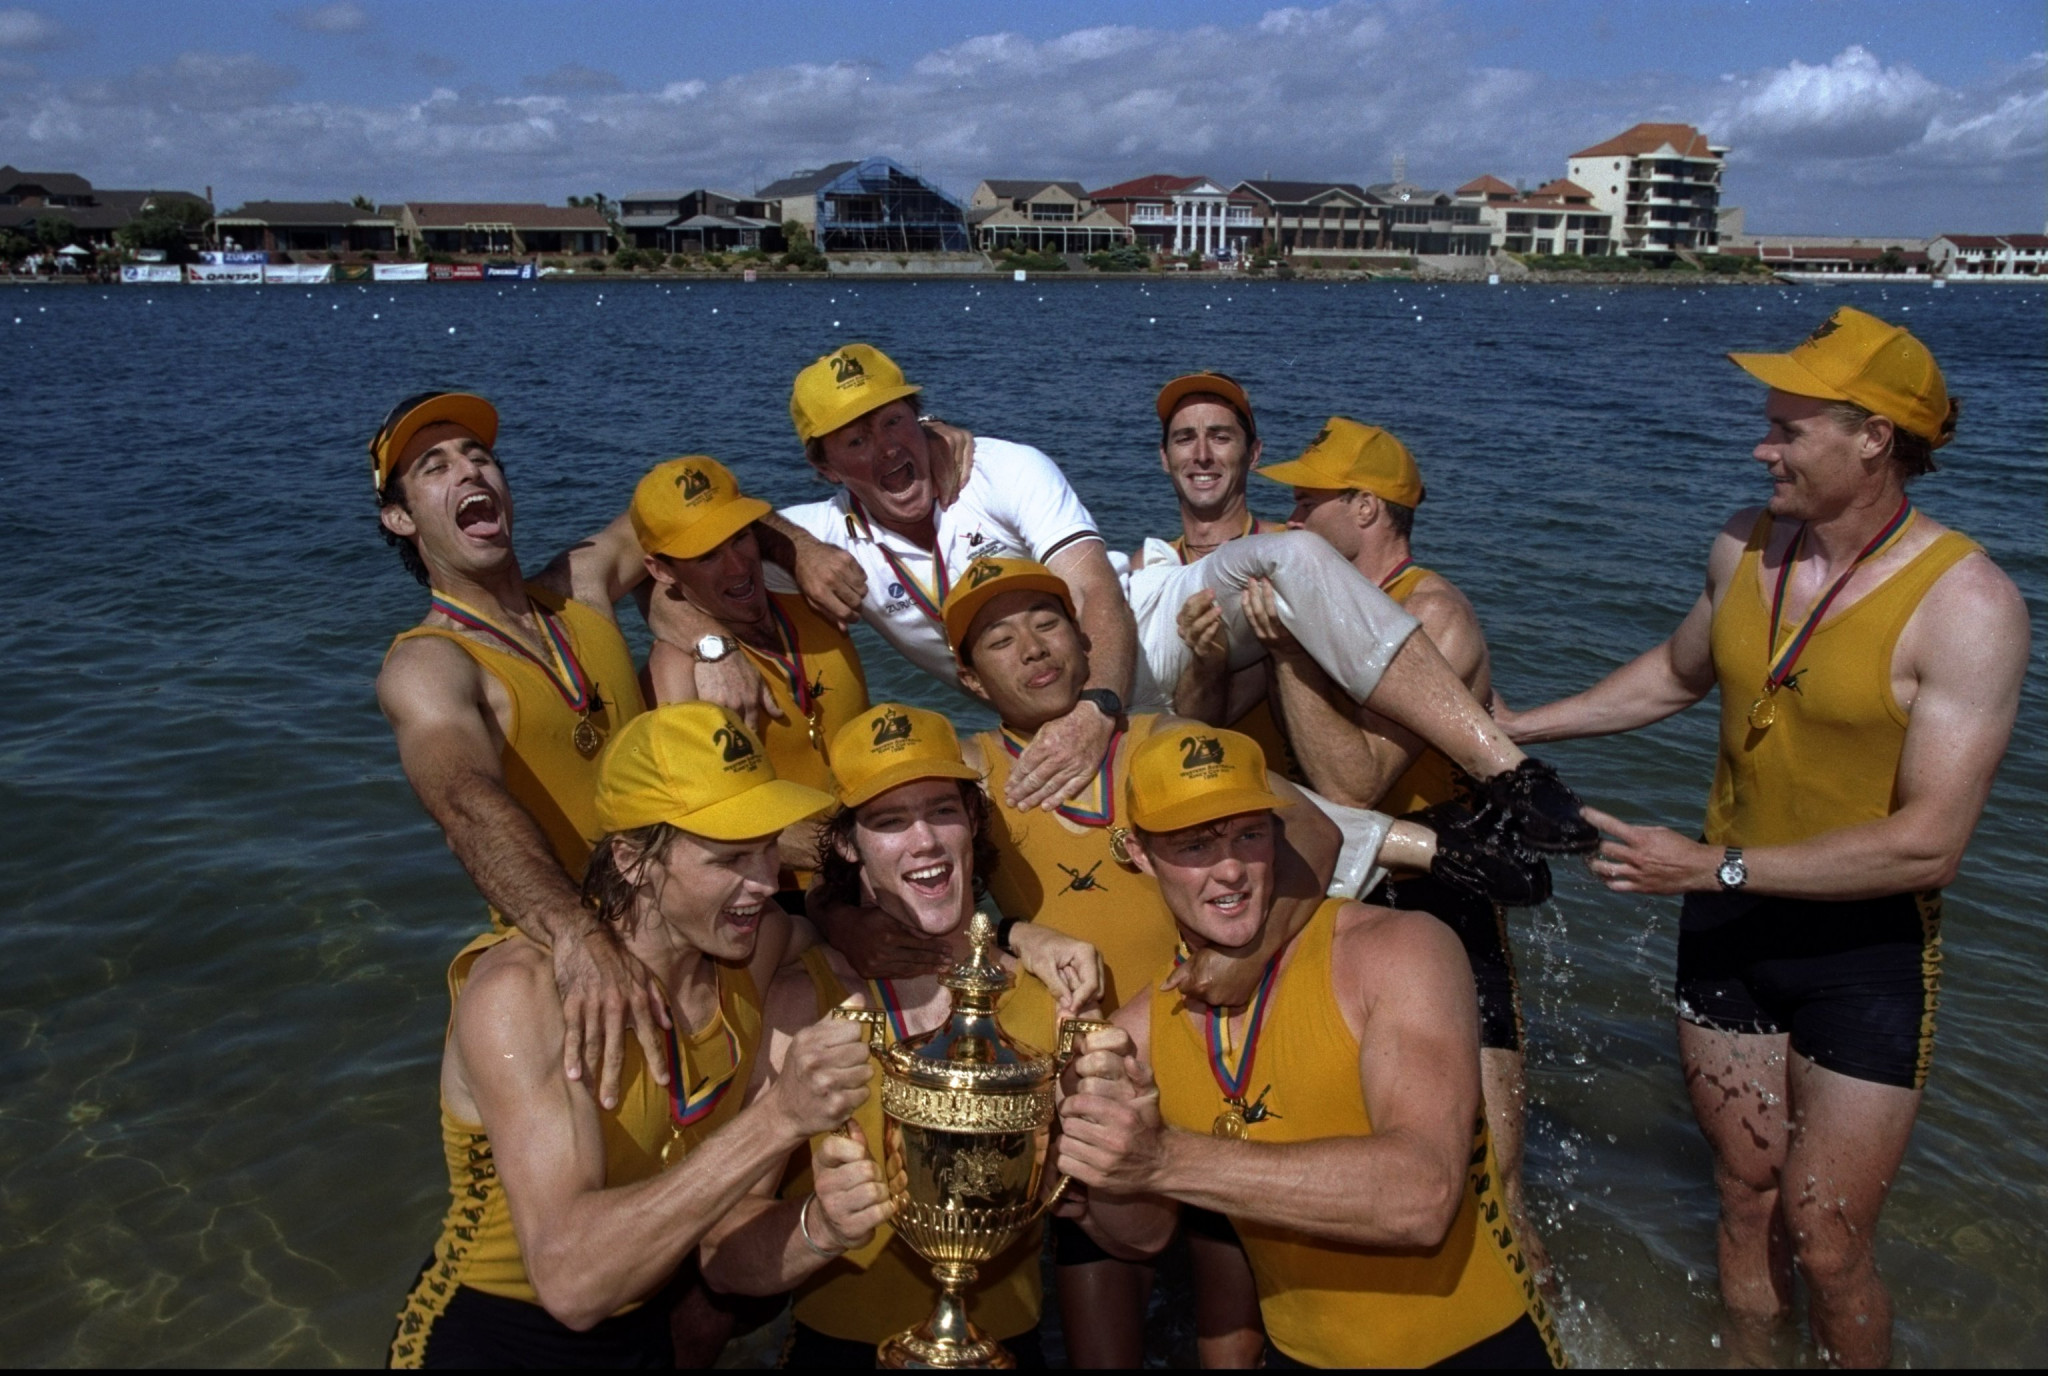 The late Nick Garratt was responsible for coaching Western Australia to a memorable King’s Cup victory in 1999 in West Lakes in South Australia ©Getty Images